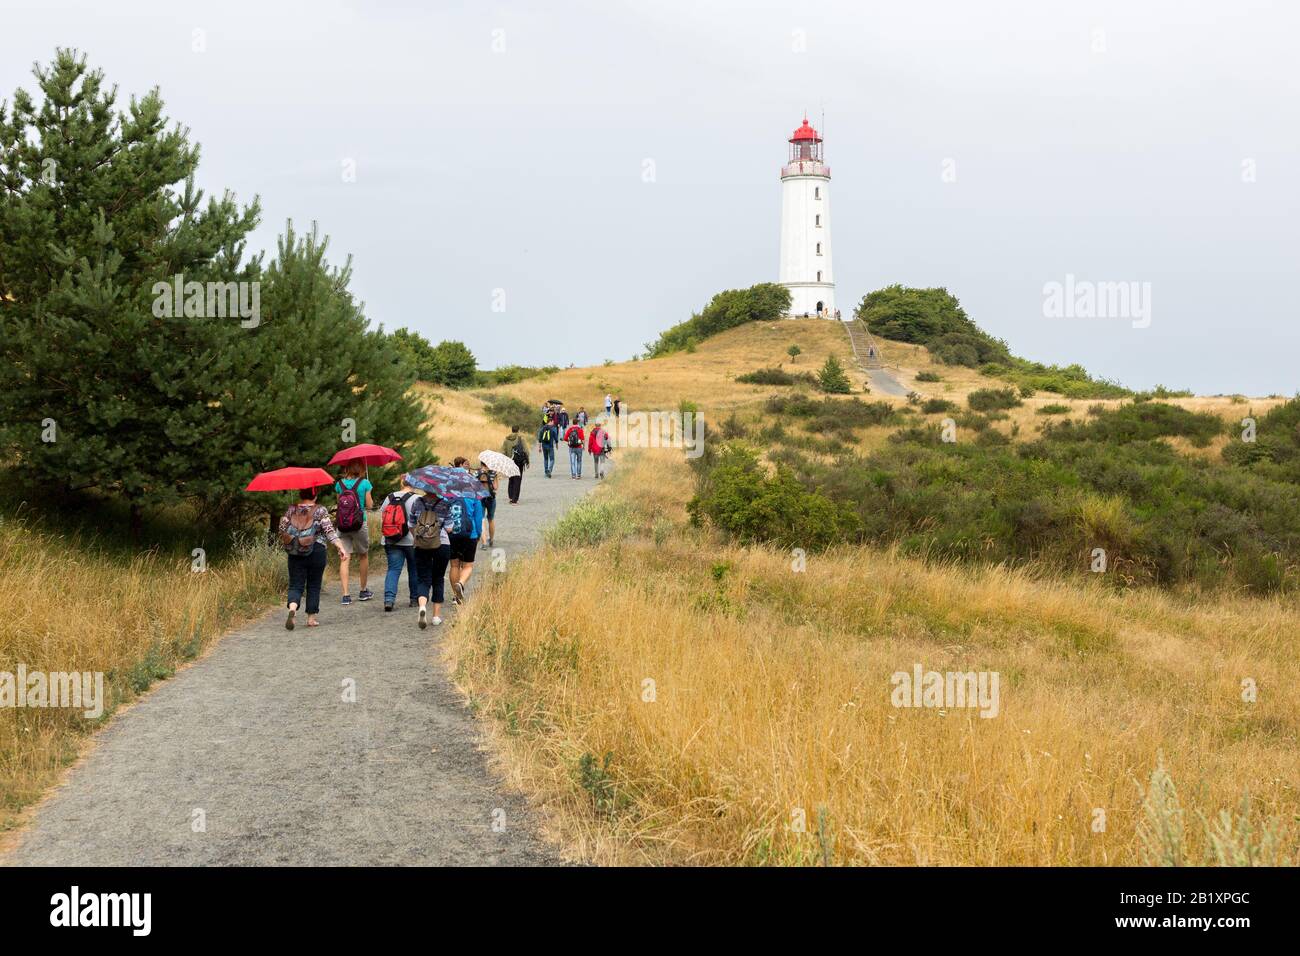 Historic Dornbusch lighthouse on Hiddensee Island (baltic sea) on a rainy day. Tourists with umbrellas walking towards the lighthouse. Stock Photo